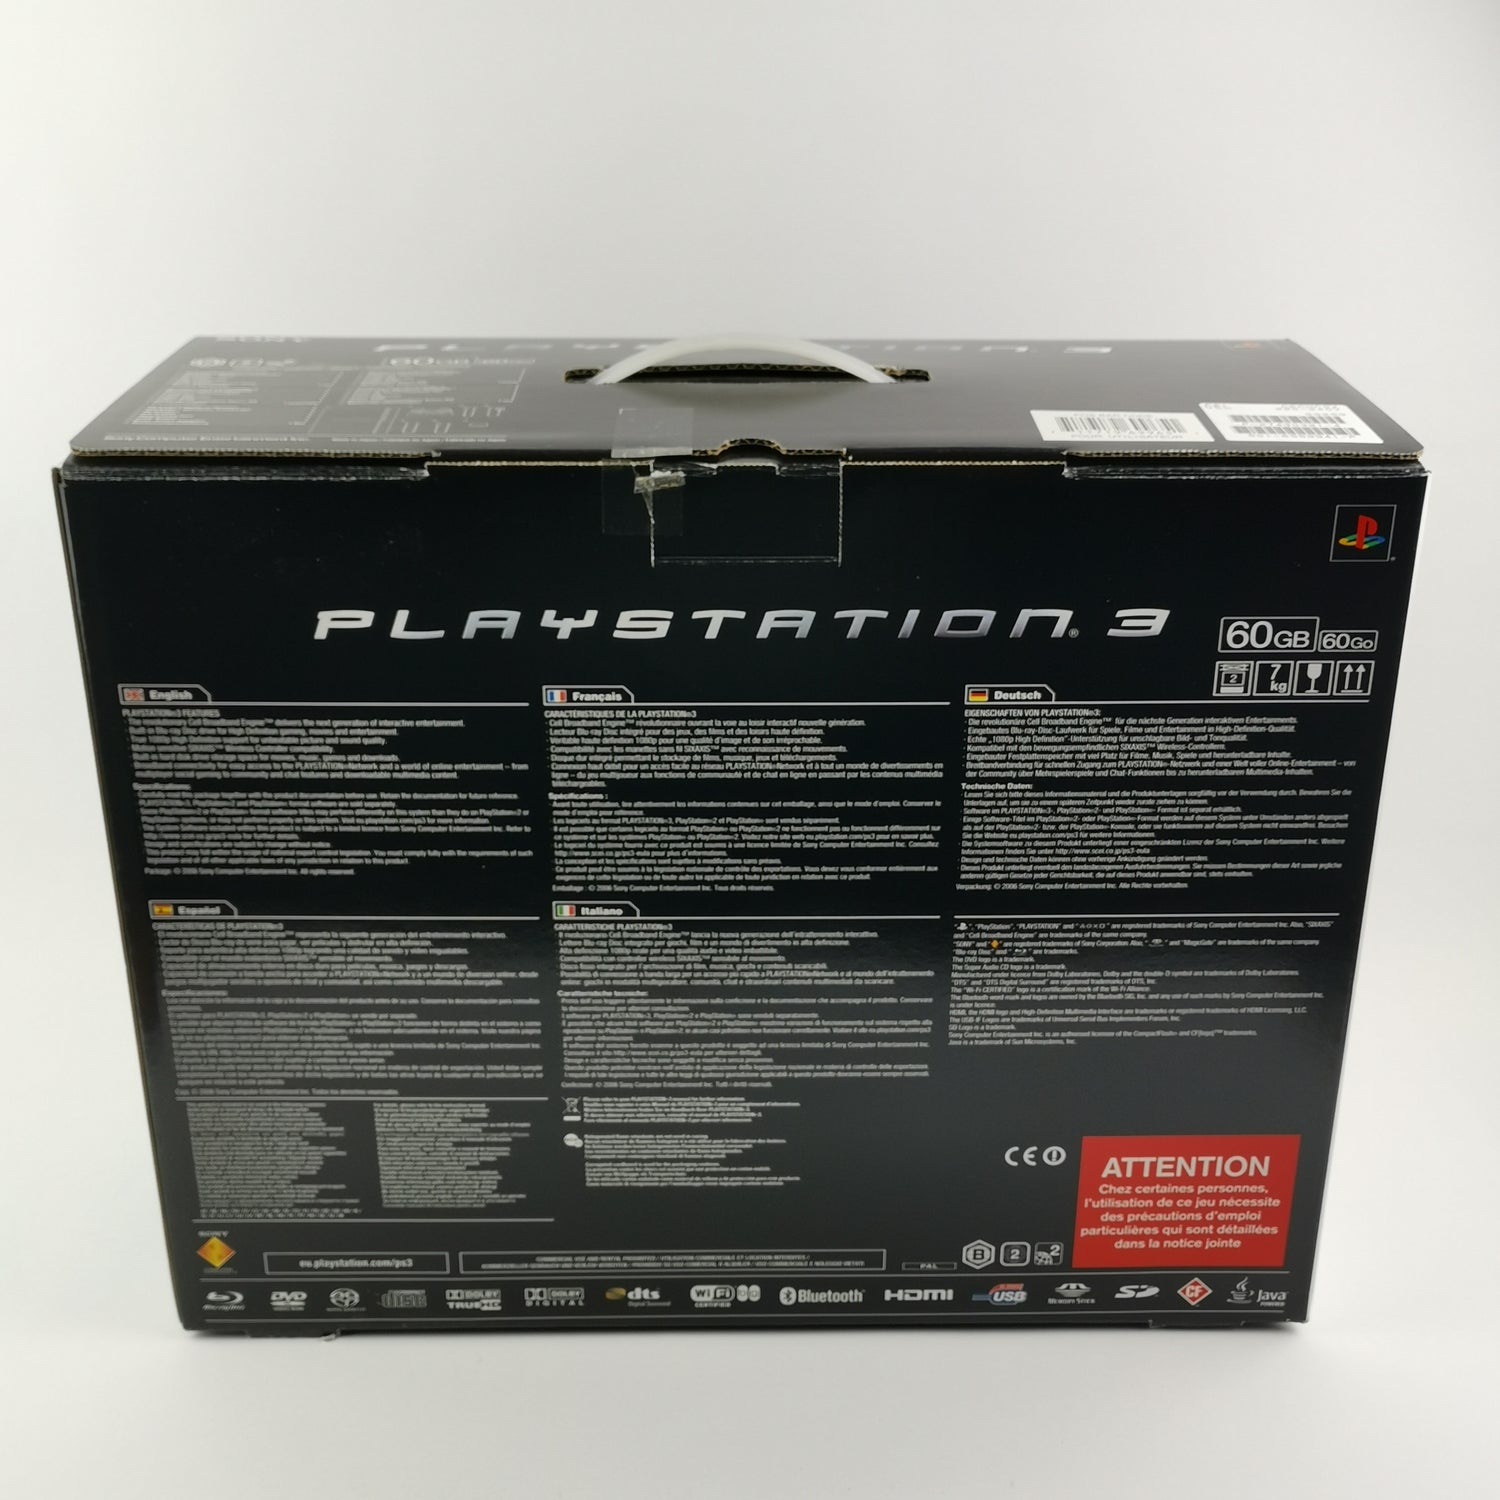 Sony Playstation 3 Console: Starter Pack incomplete - PS3 Console in original packaging PAL